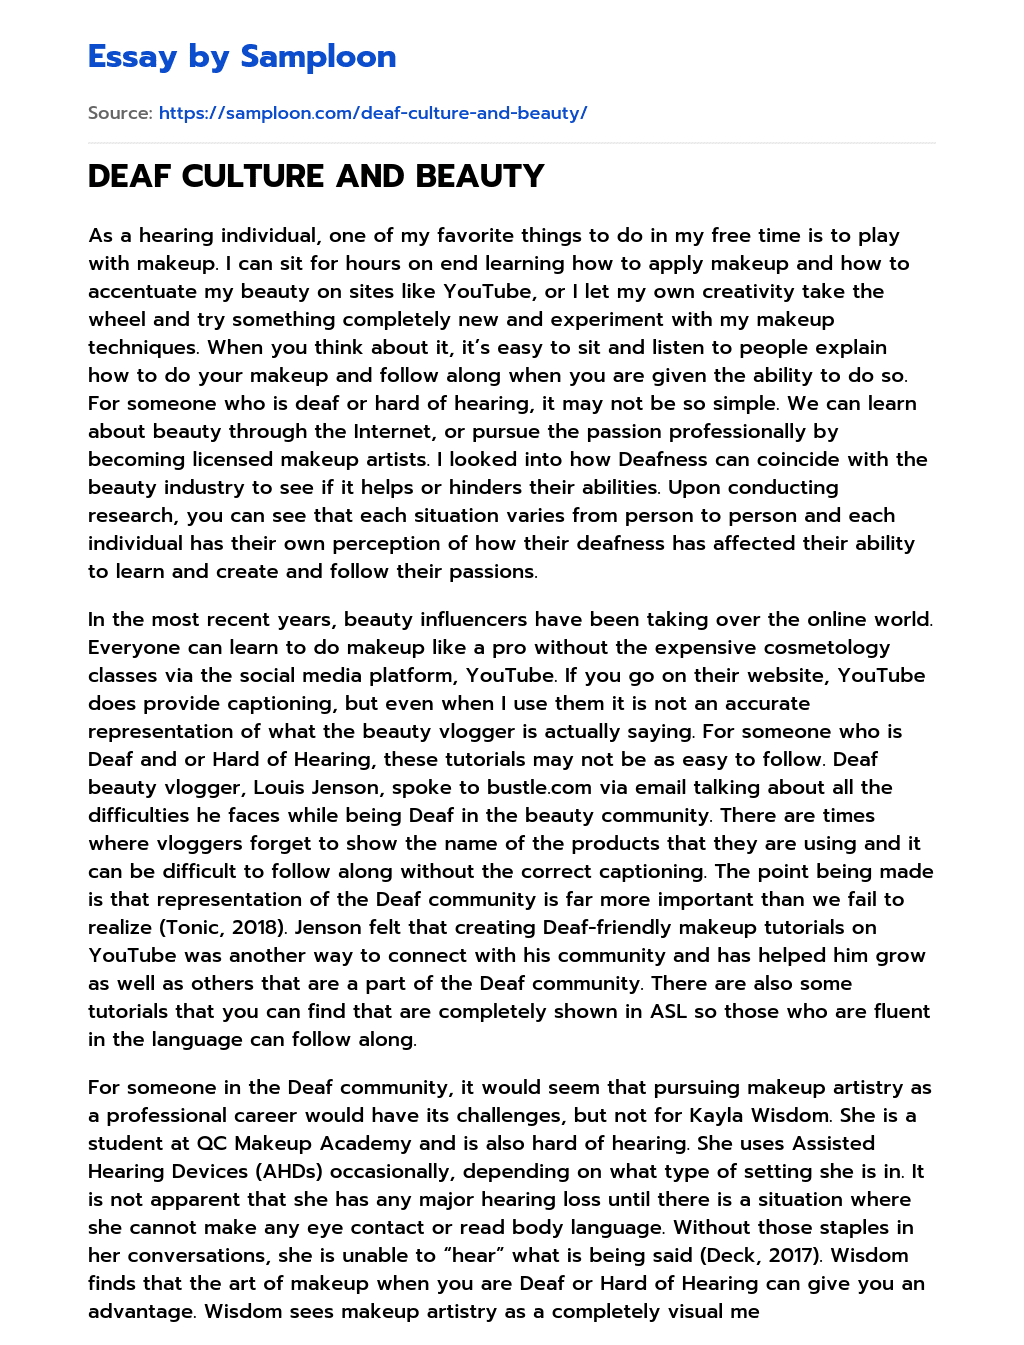 DEAF CULTURE AND BEAUTY essay